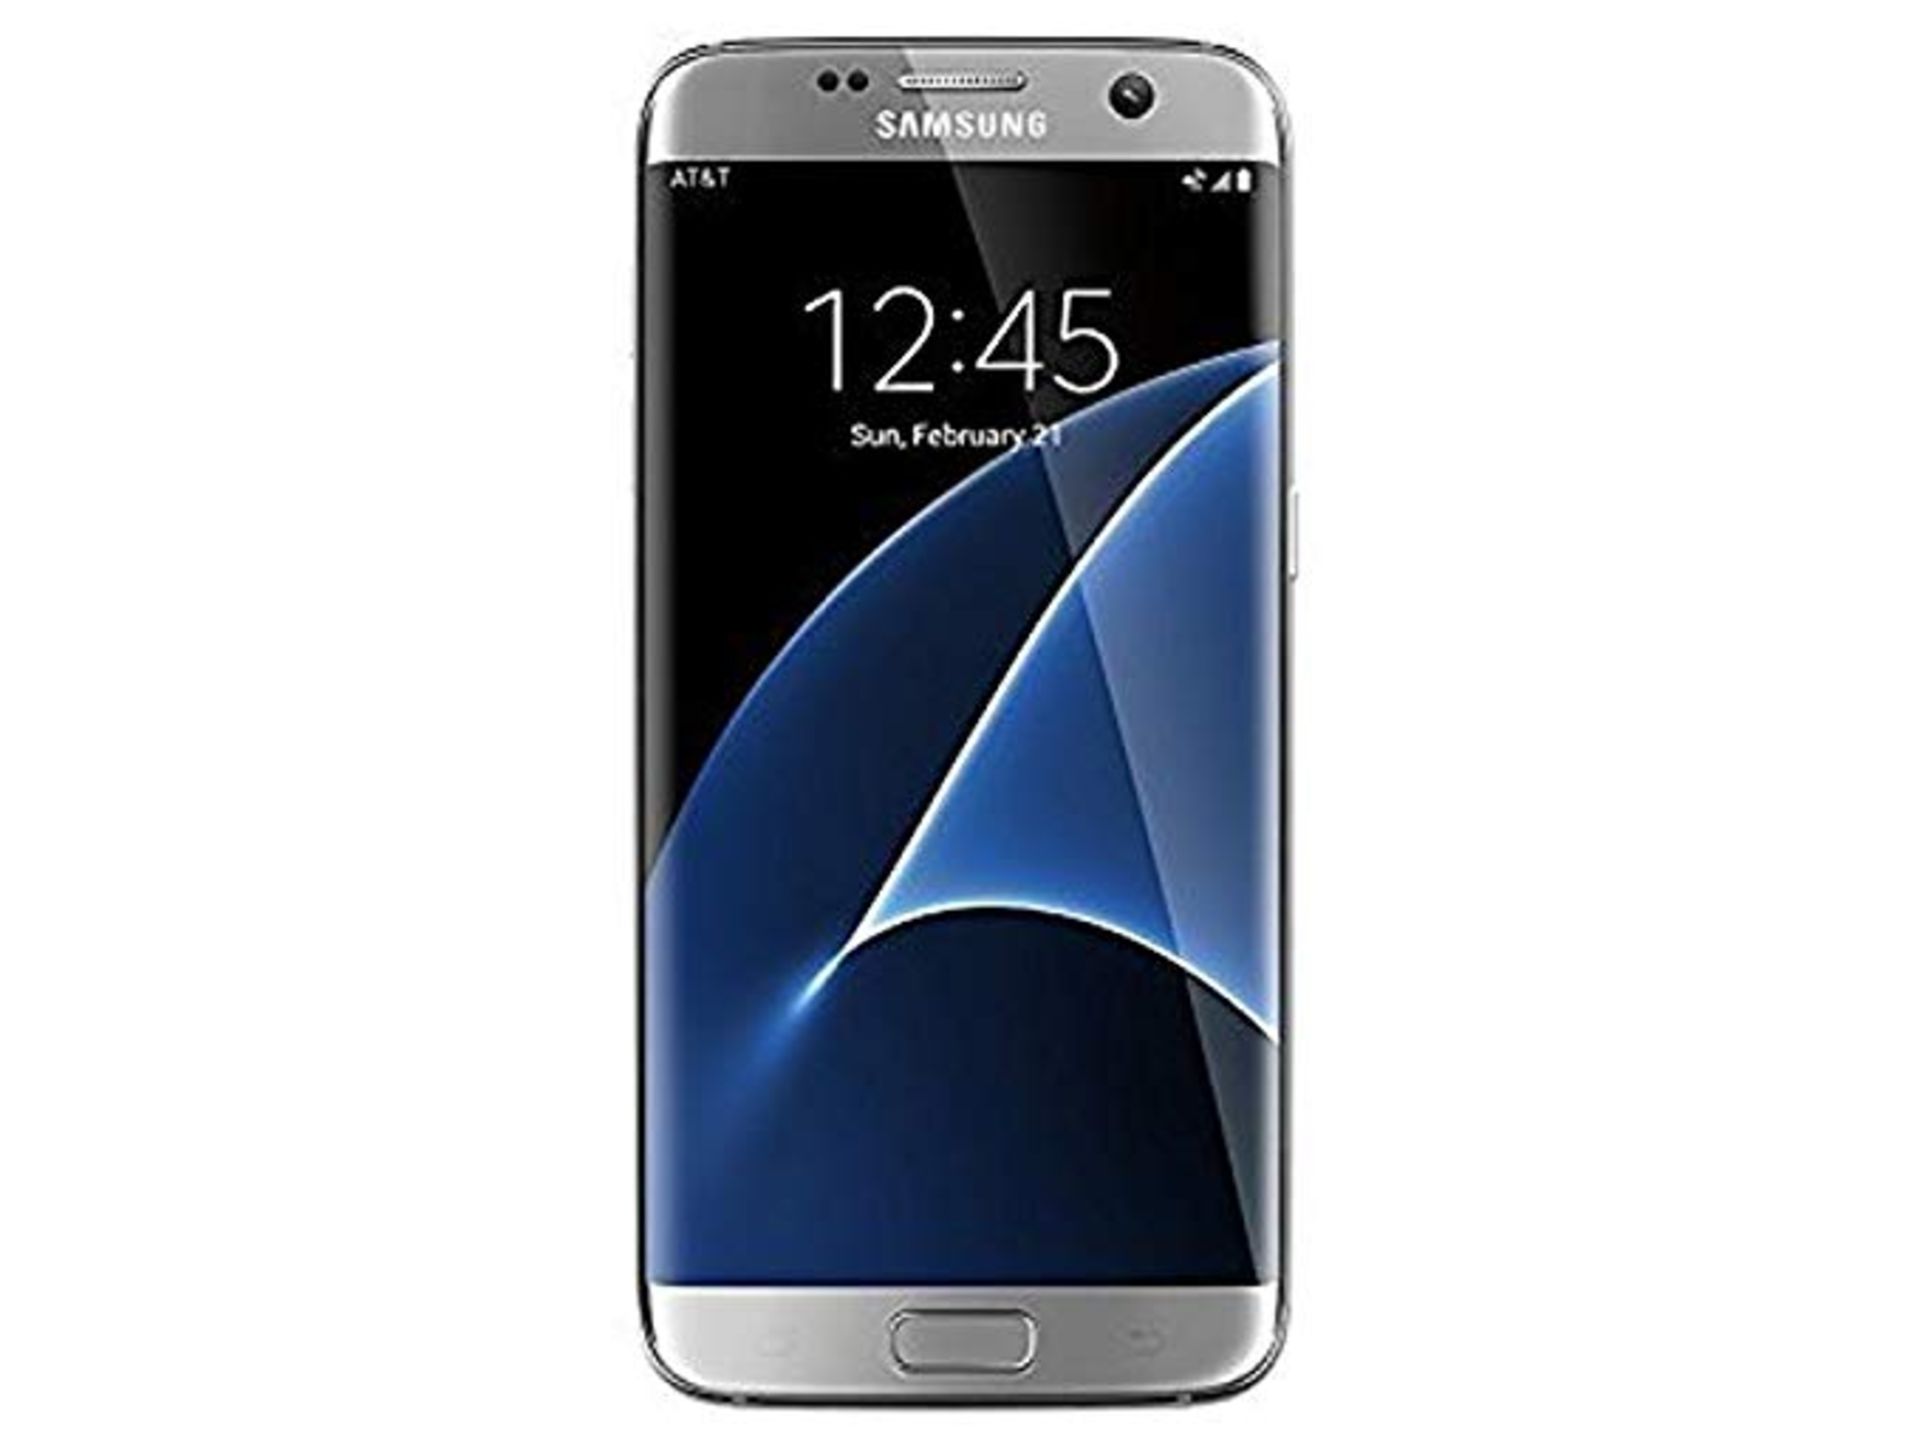 Grade A Samsung Galaxy S7 Edge (G935A/T/V/P) Colours May Vary - Item Available Approx 12 Working